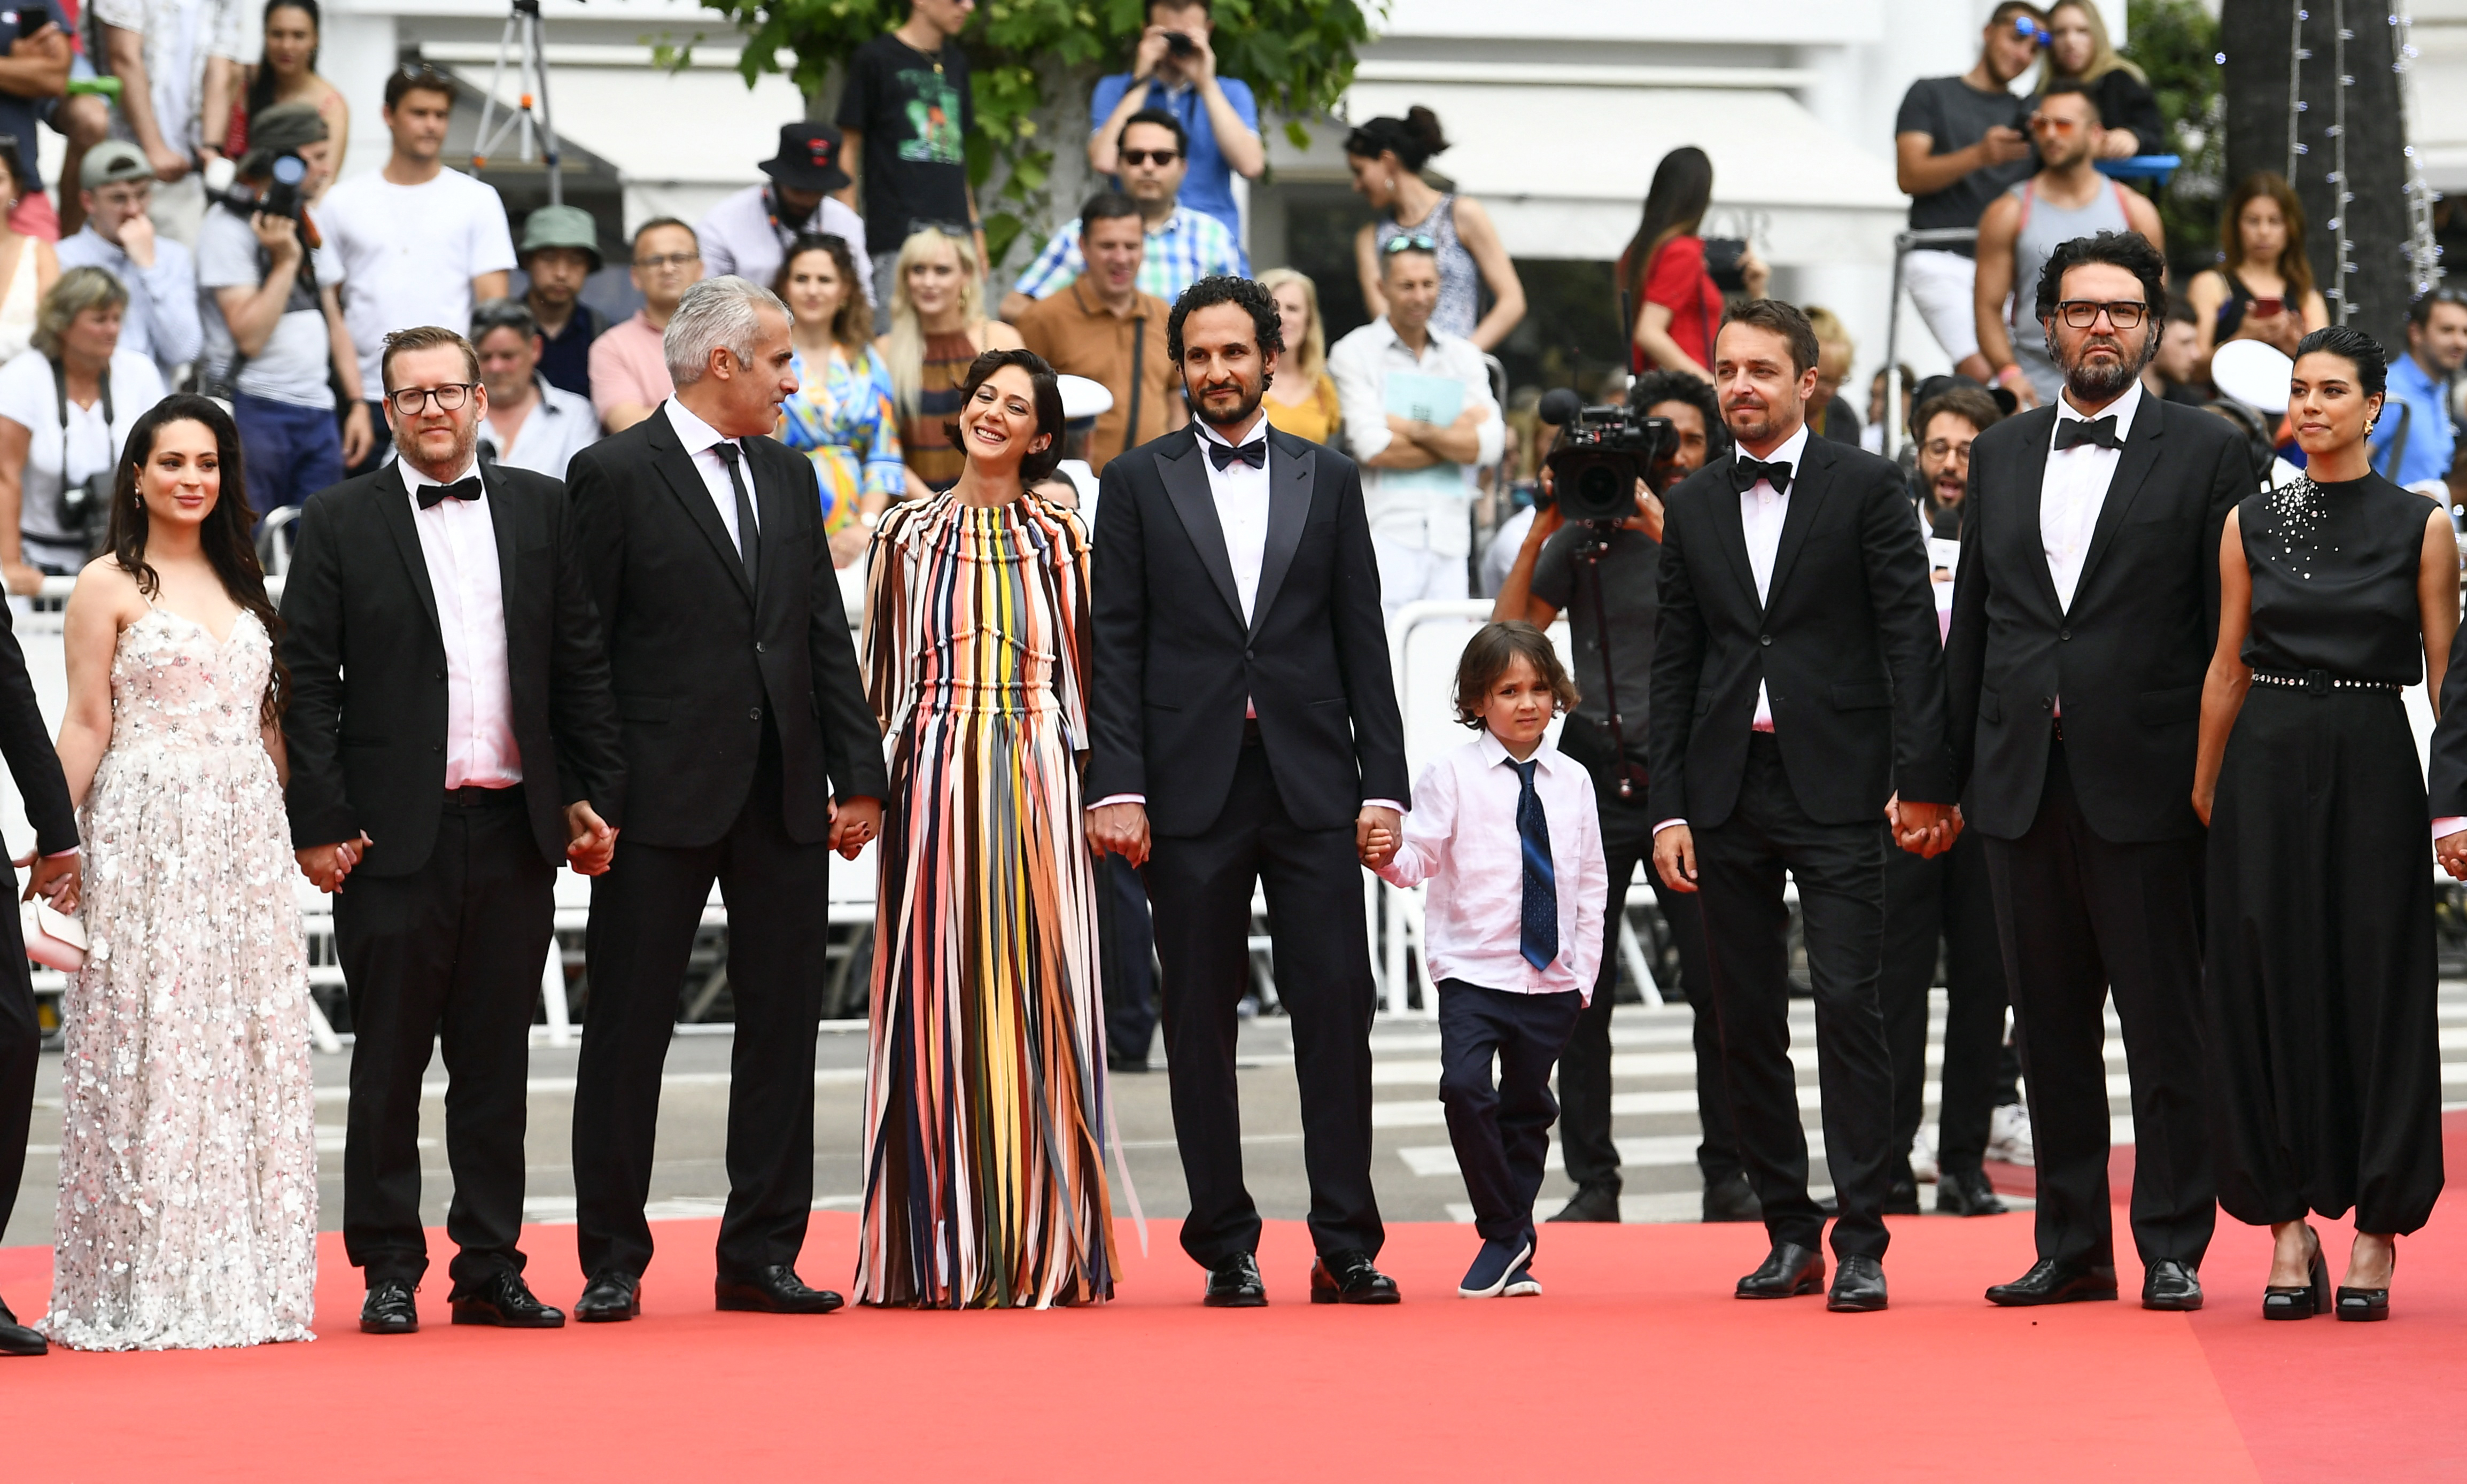 The 75th Cannes Film Festival - Screening of the film "Holy Spider" in competition - Red Carpet Arrivals